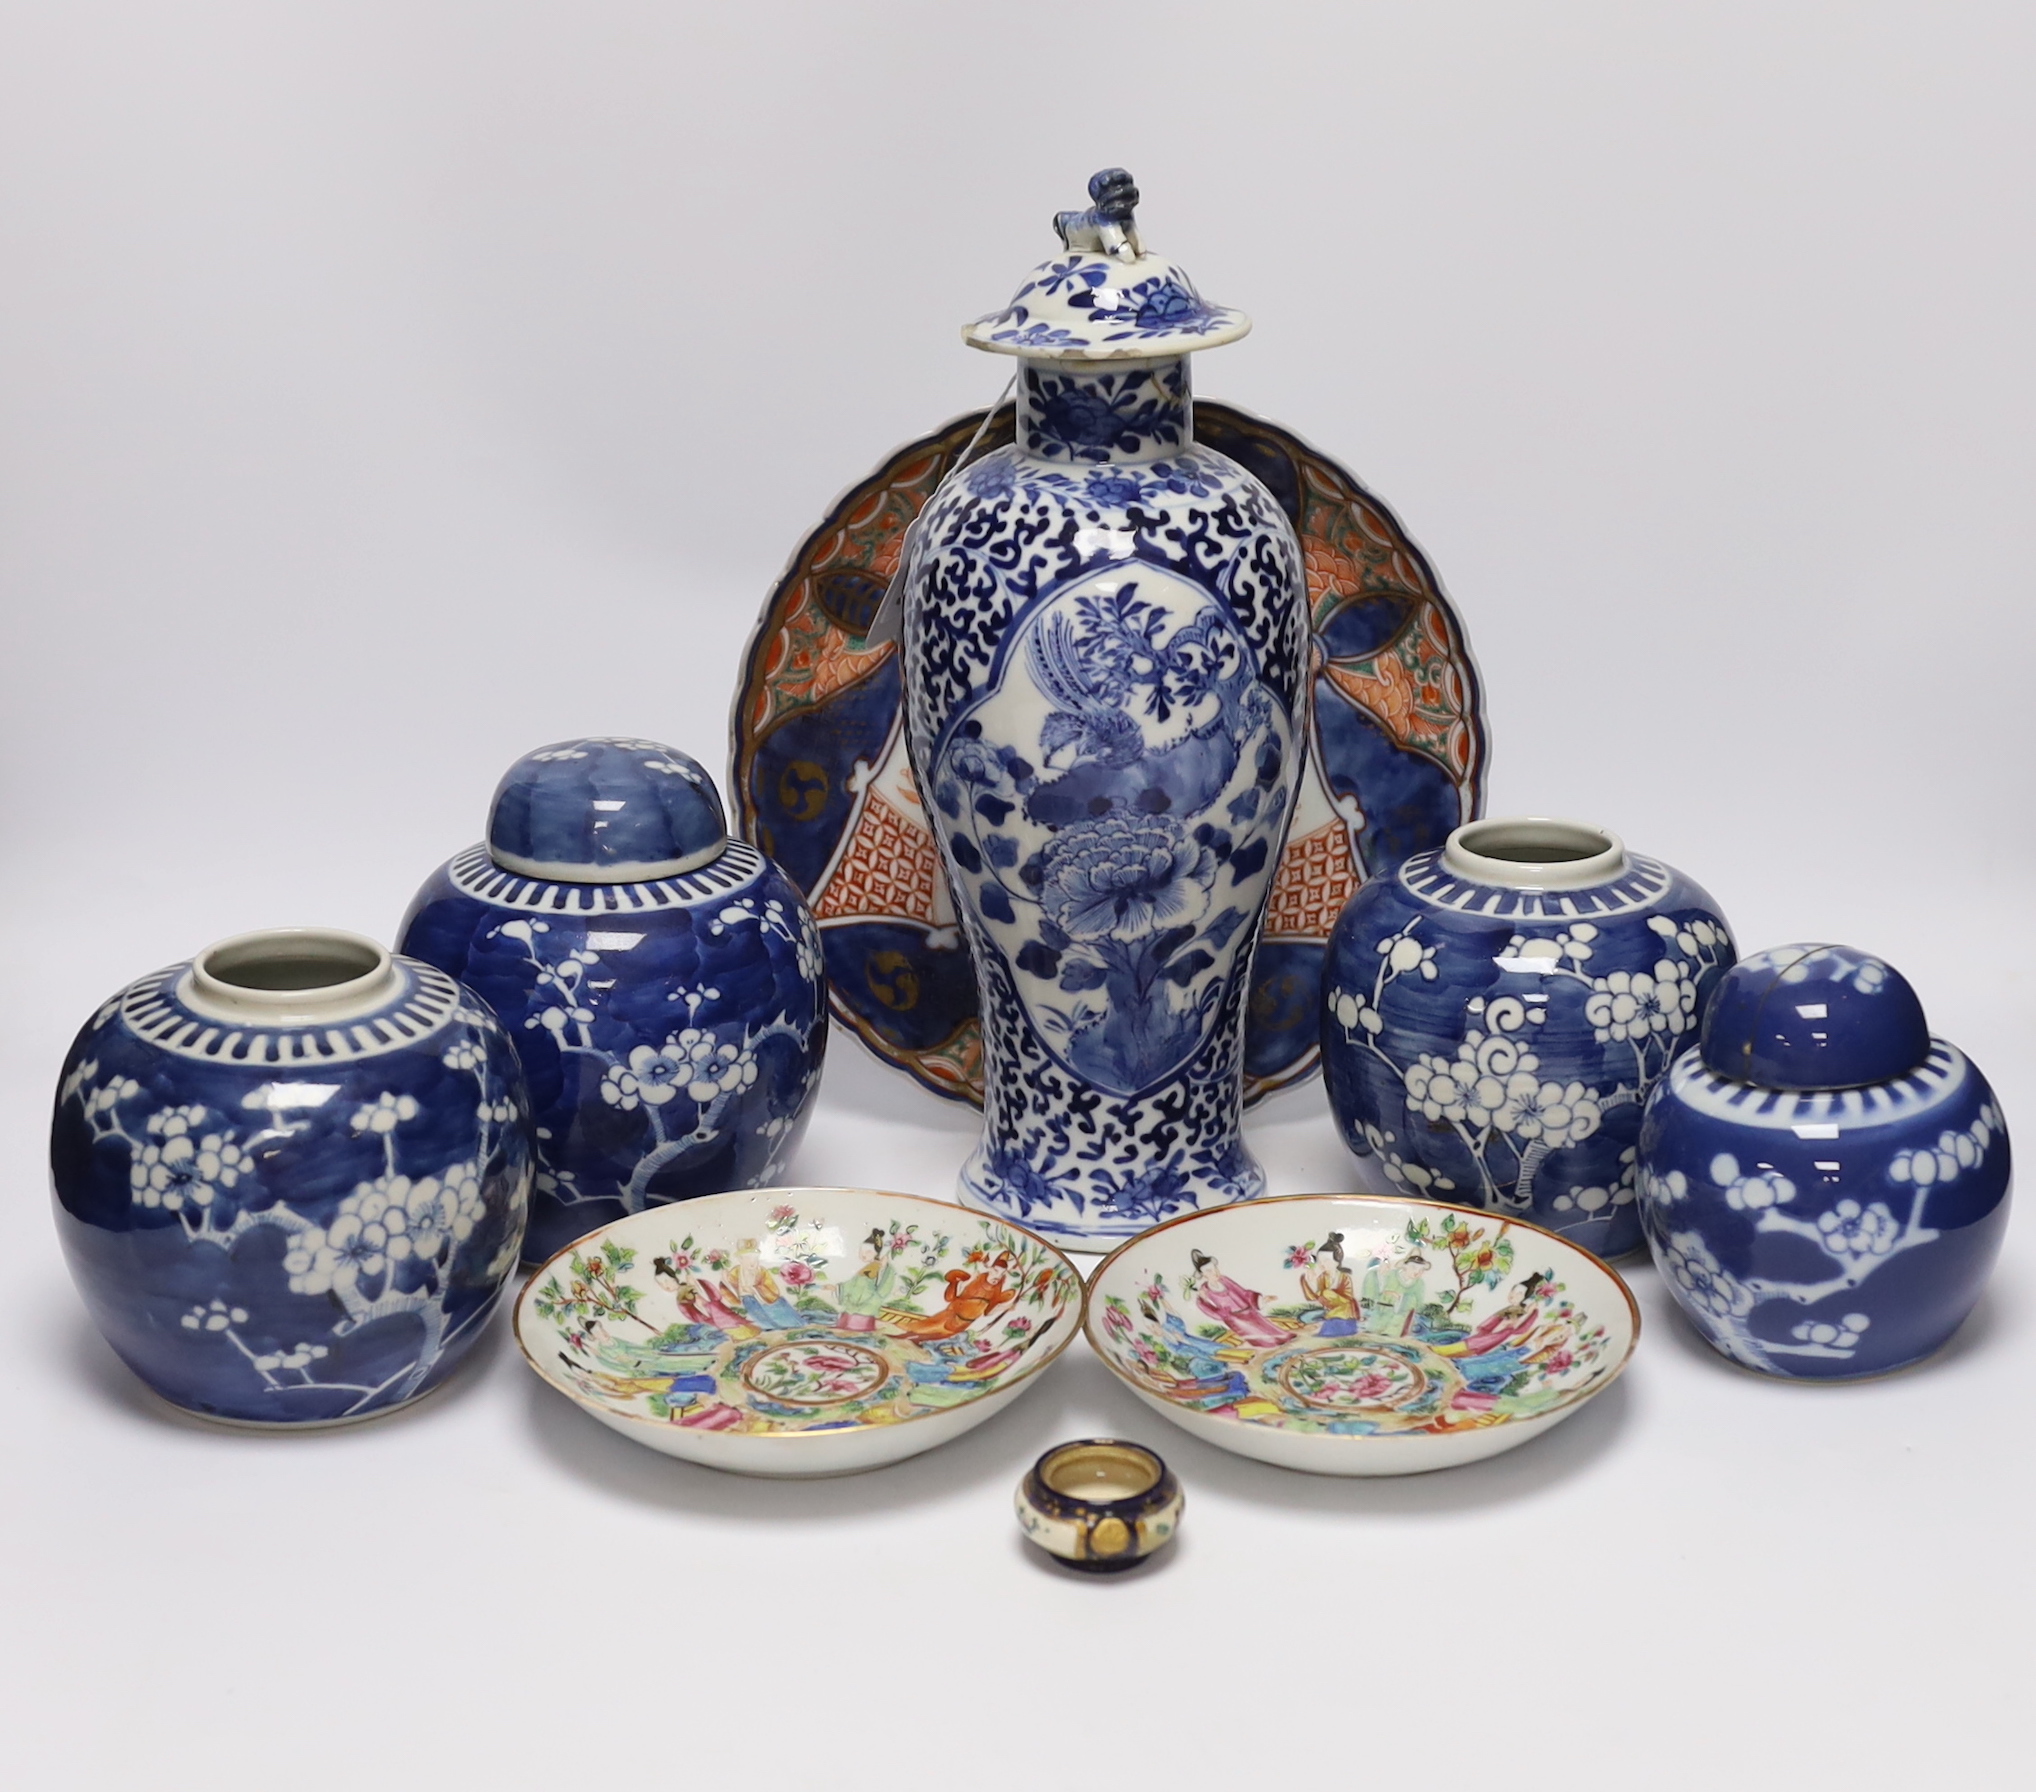 An early 20th century Chinese blue and white vase and cover, pair of 19th century Chinese famille rose dishes, four prunus jars, two covers, a Japanese Meiji period Imari dish and a small satsuma pot, some damage, talles